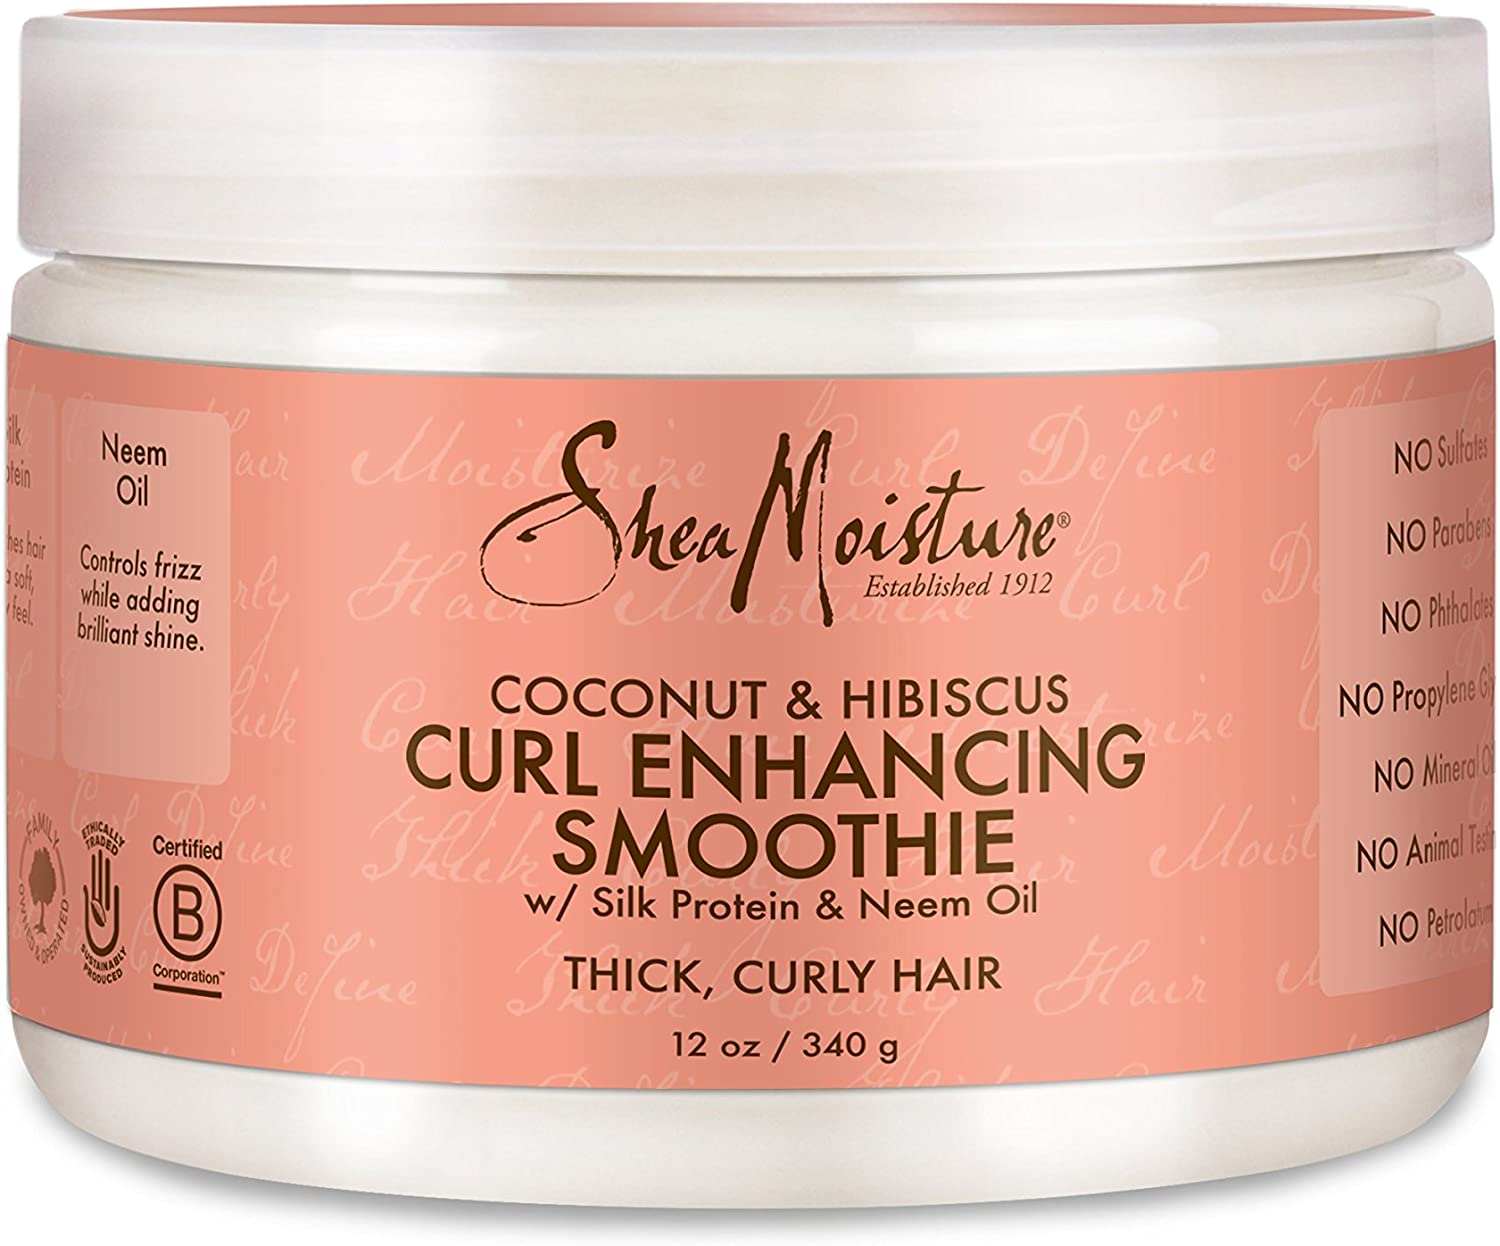 Shea Moisture Coconut & Hibiscus Curl Enhancing Smoothie 284g